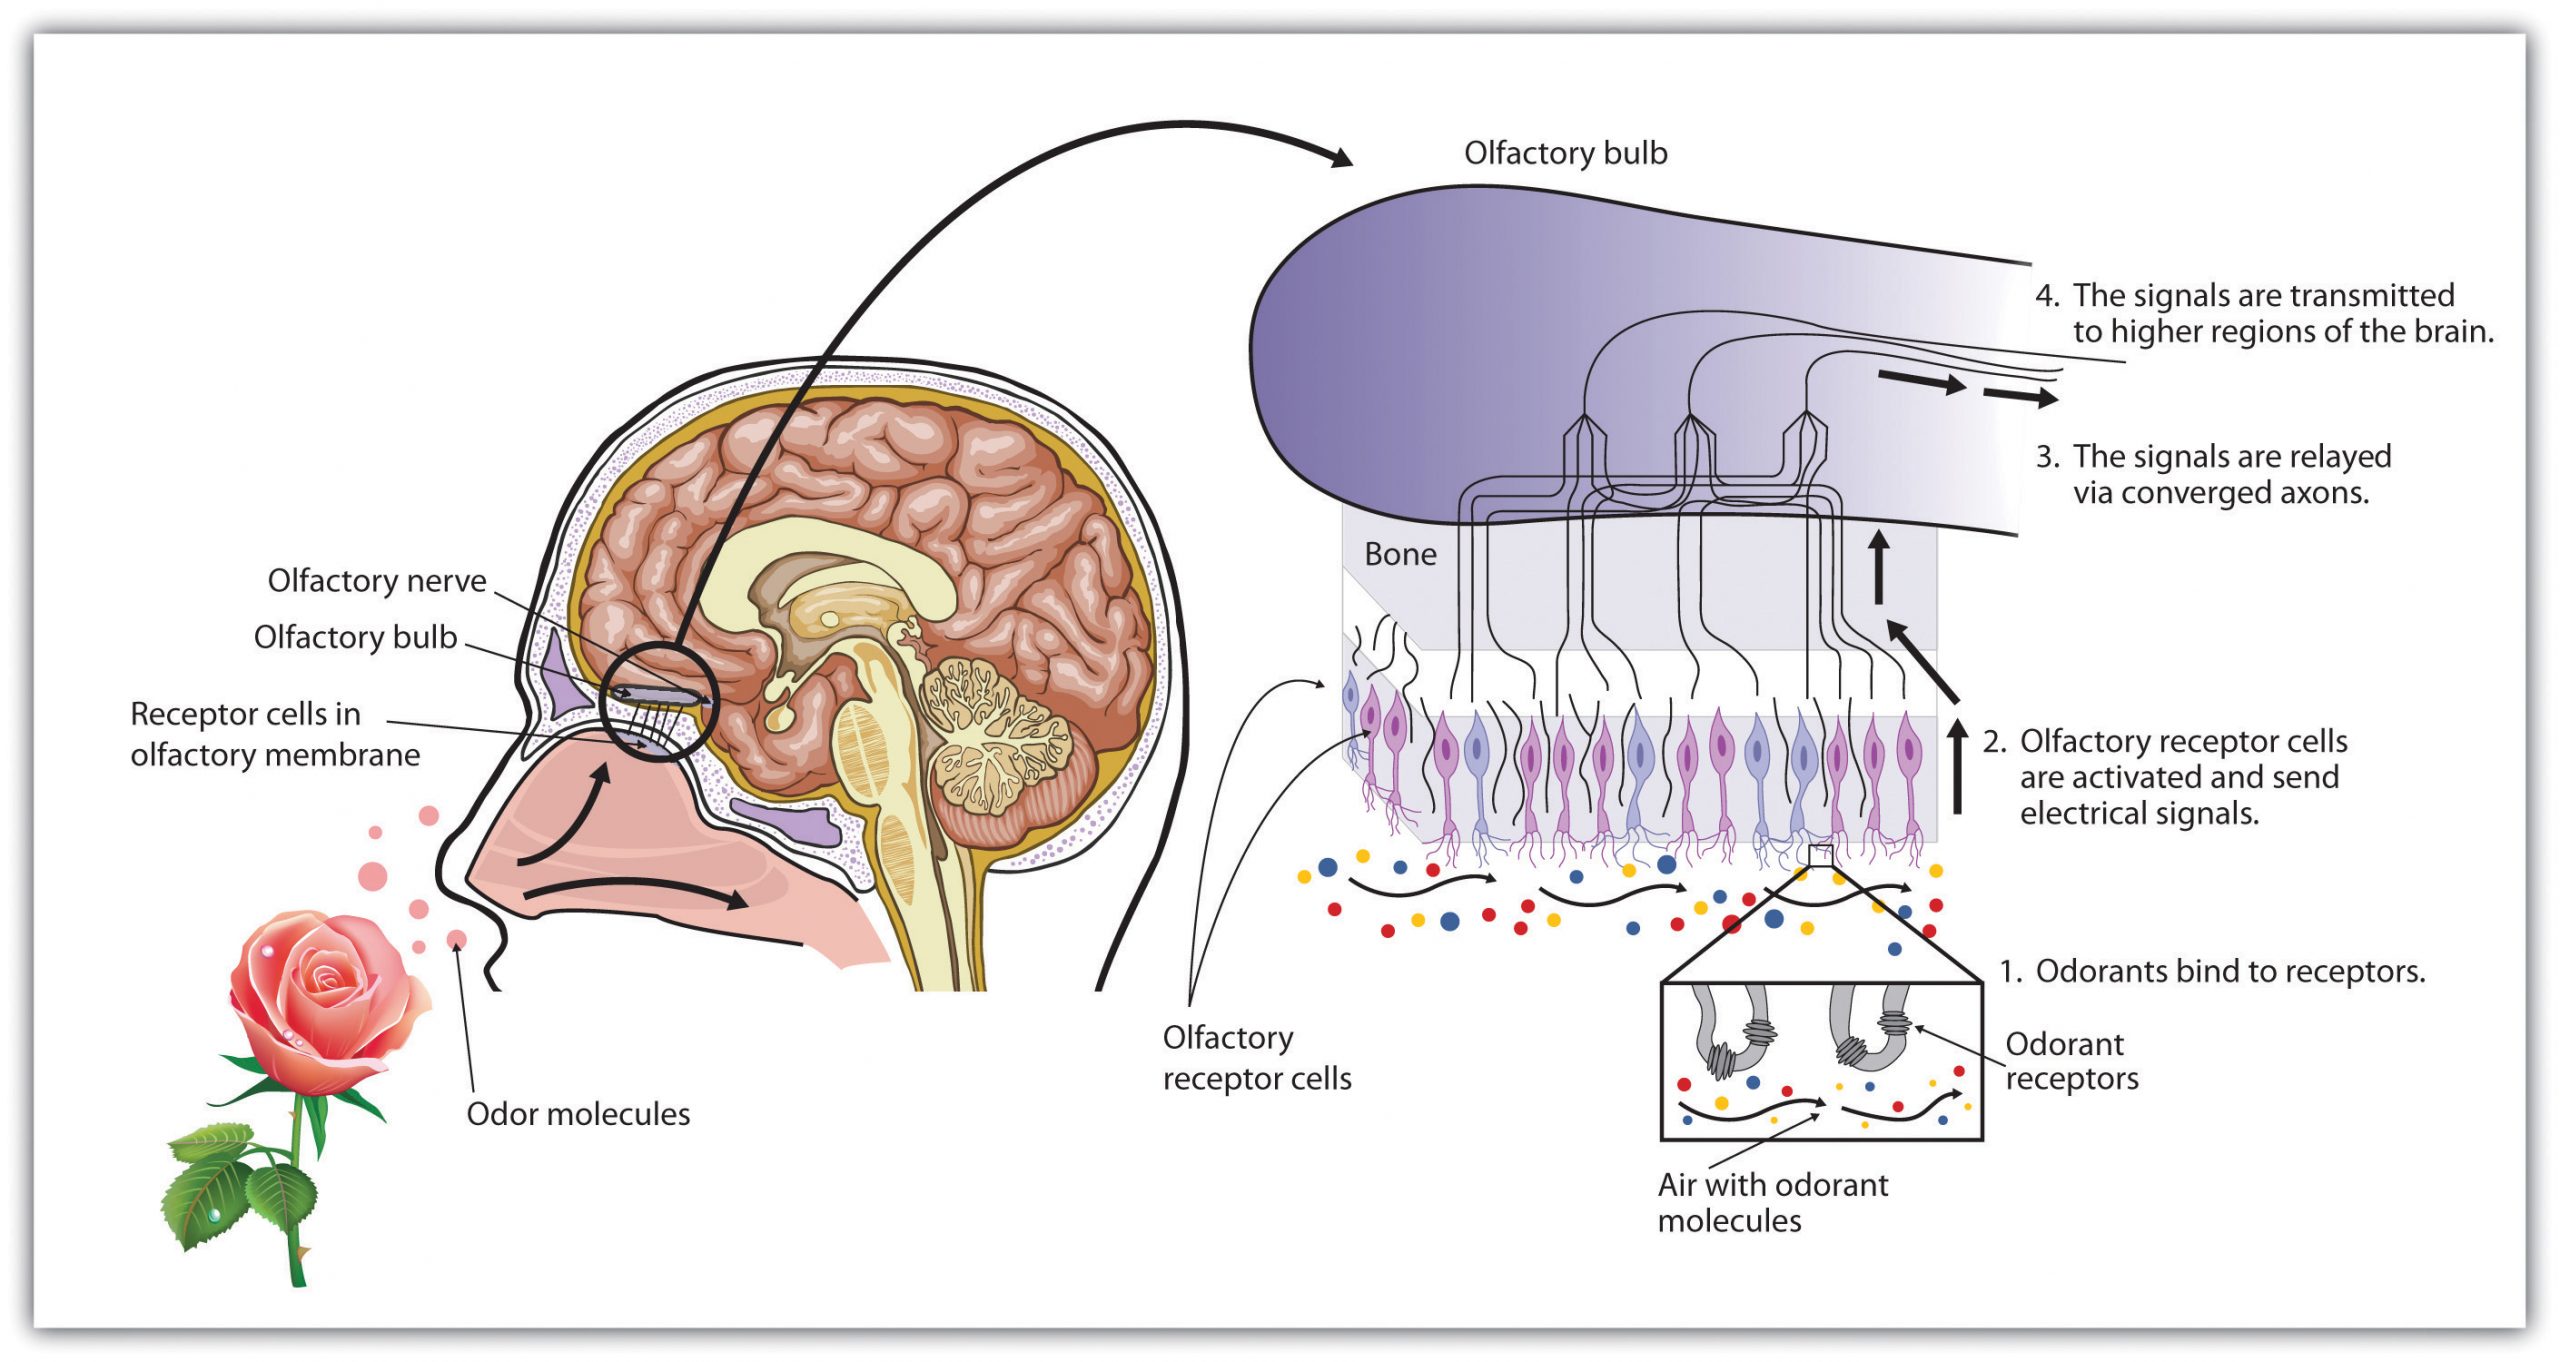 This diagram shows how odour molecules are sensed by olfactory receptor cells and signals are transmitted to higher regions of the brain.